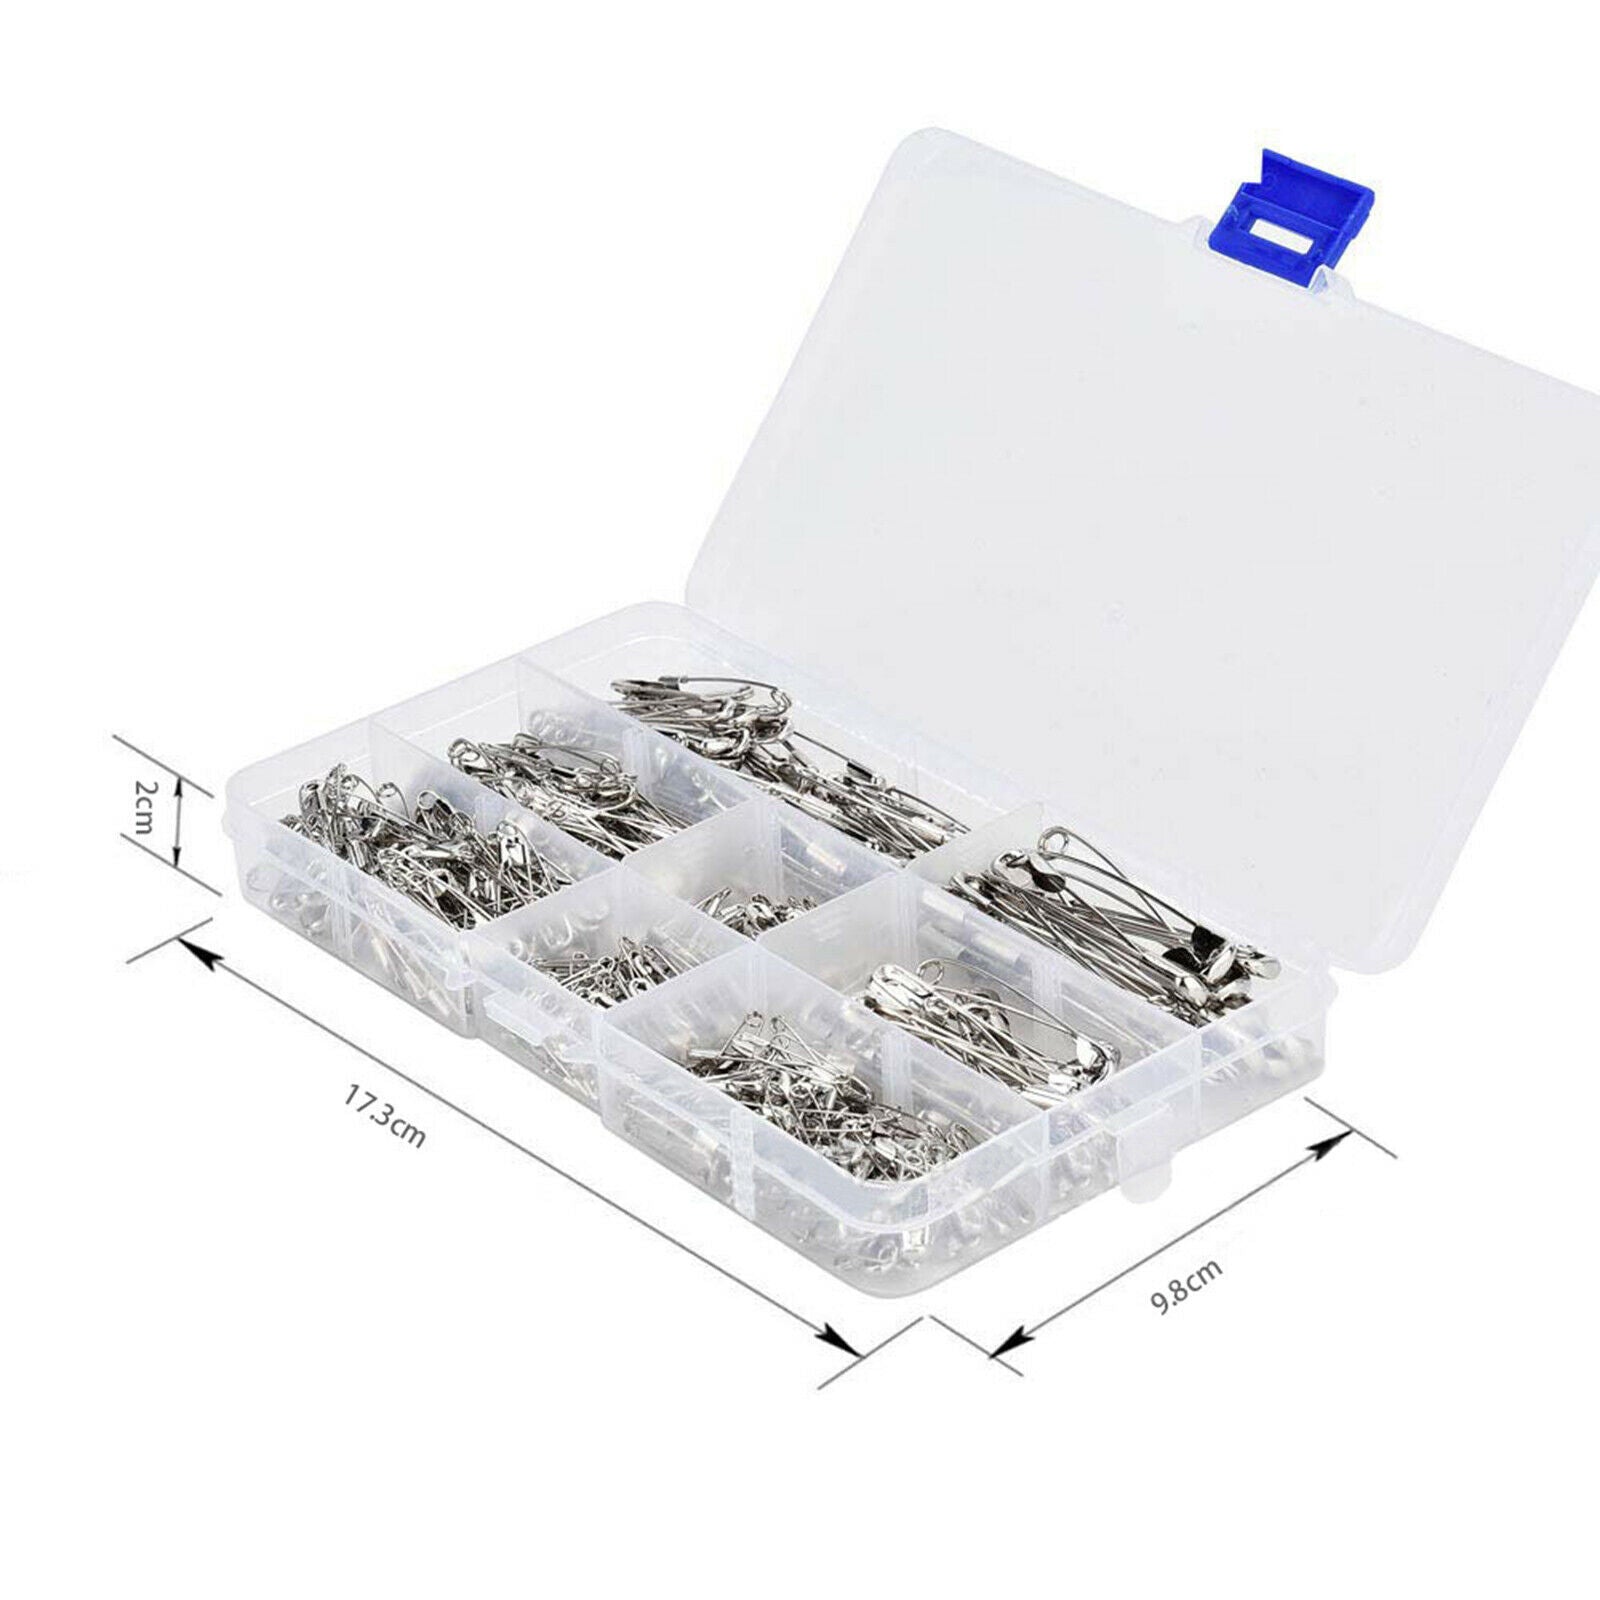 460Pcs Stainless Steel Safety Pins Steel Duty Heavy Large Size 19-54mm Set